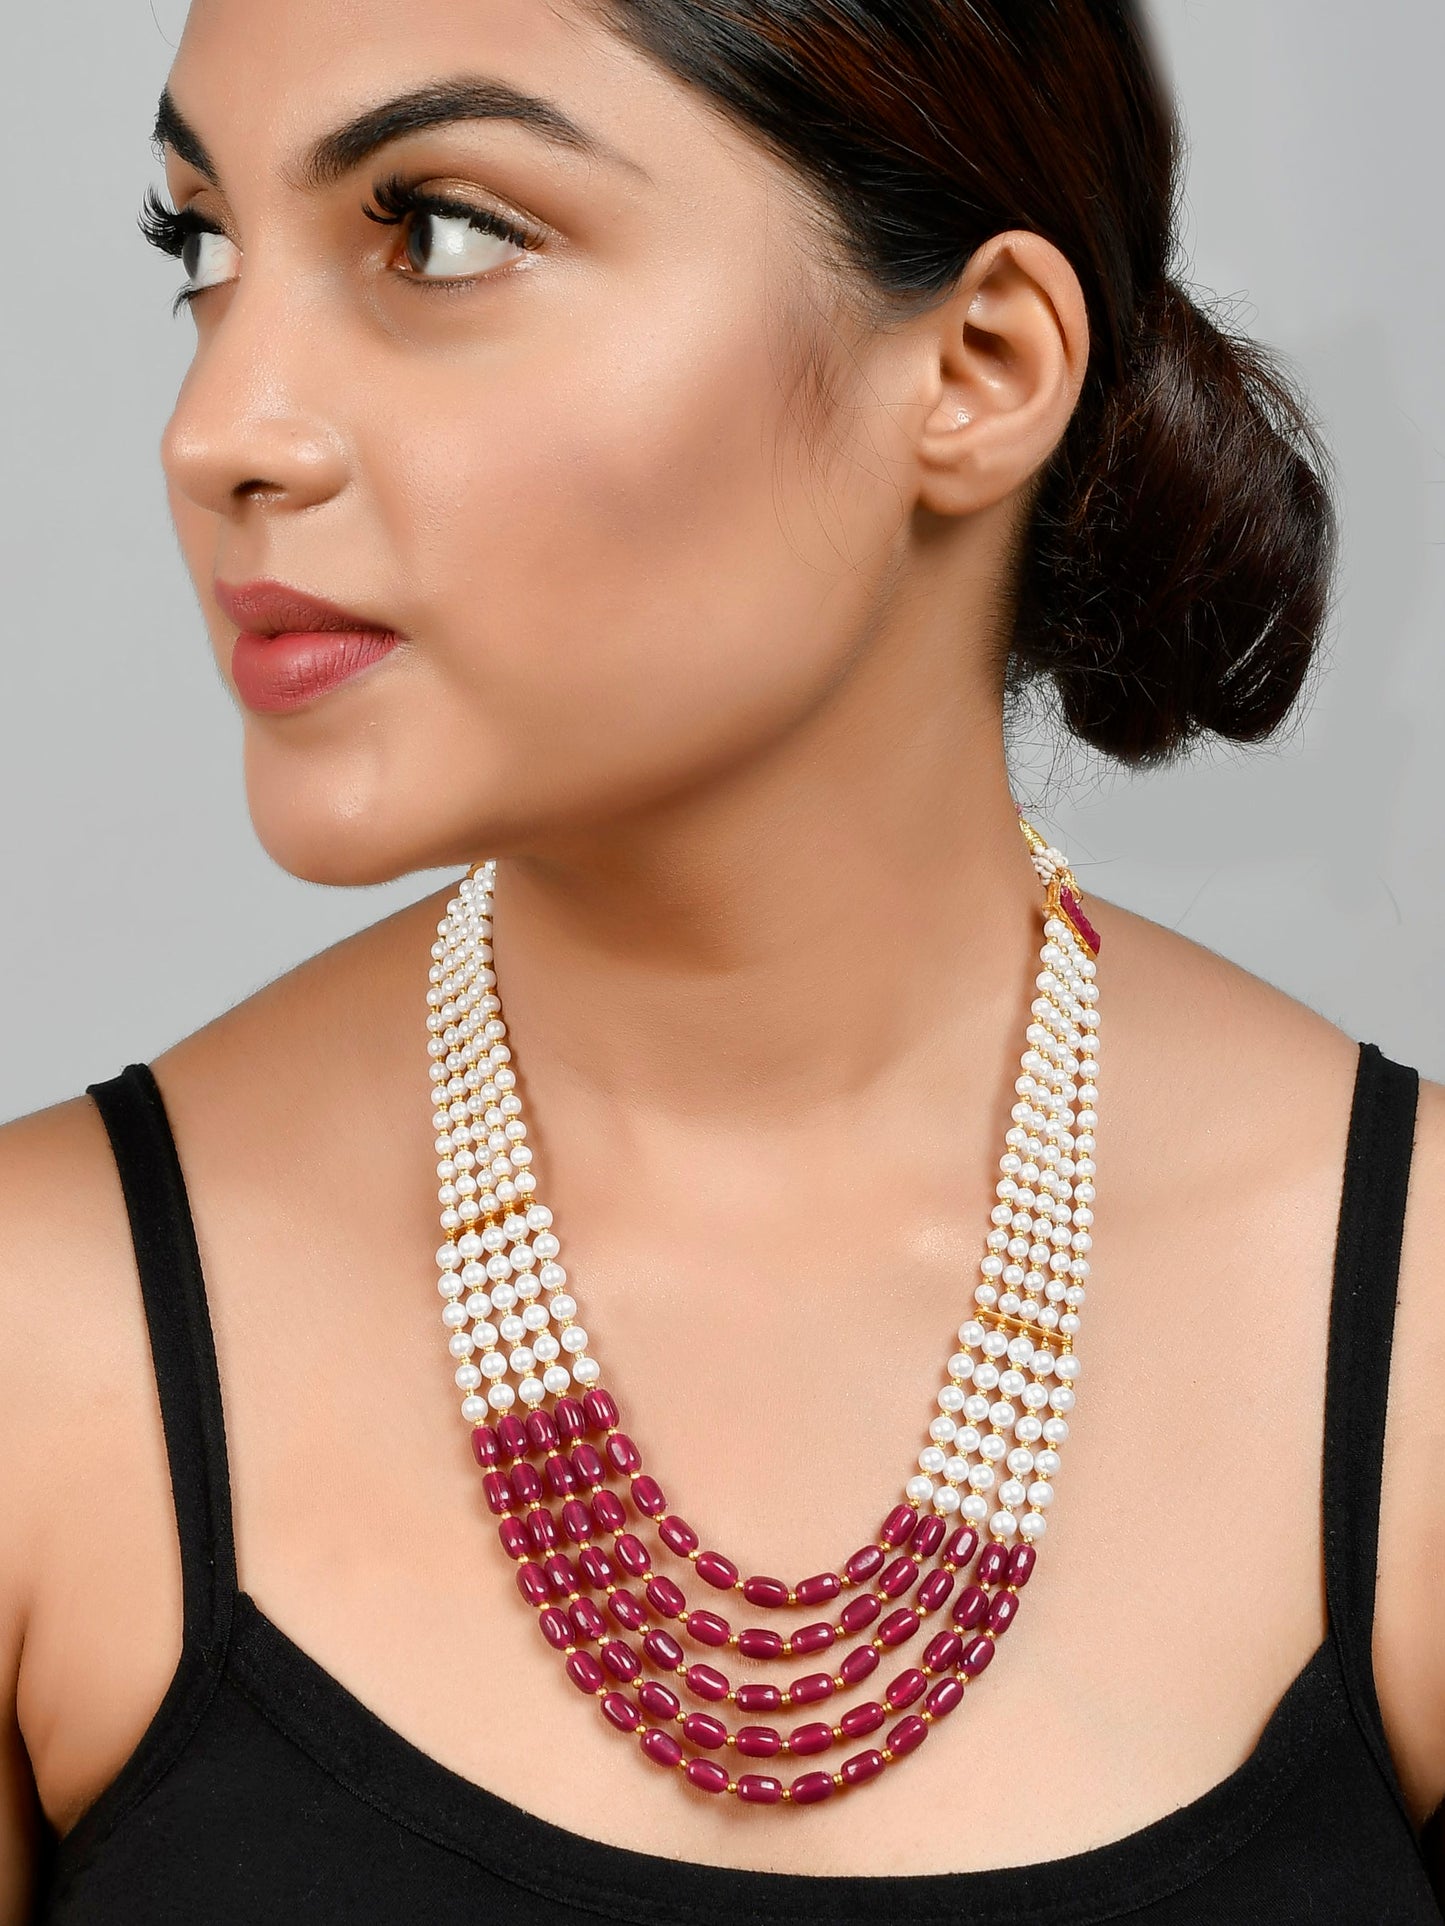 Ethnic Multilayered Necklaces for Women Online